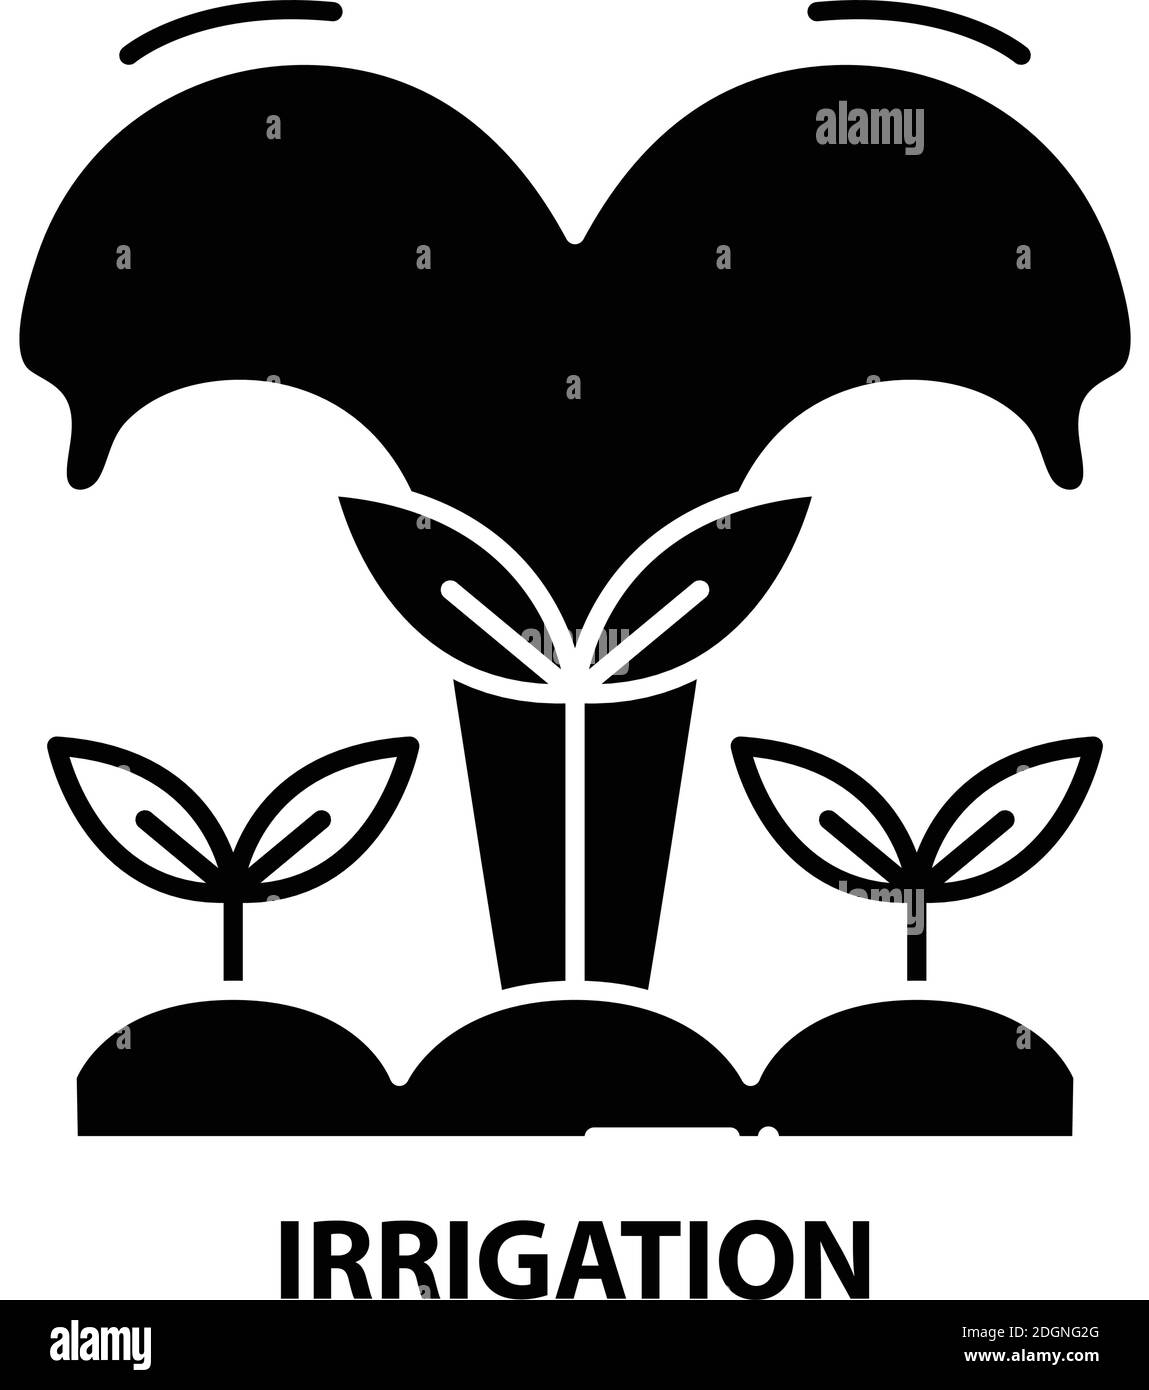 irrigation icon, black vector sign with editable strokes, concept illustration Stock Vector